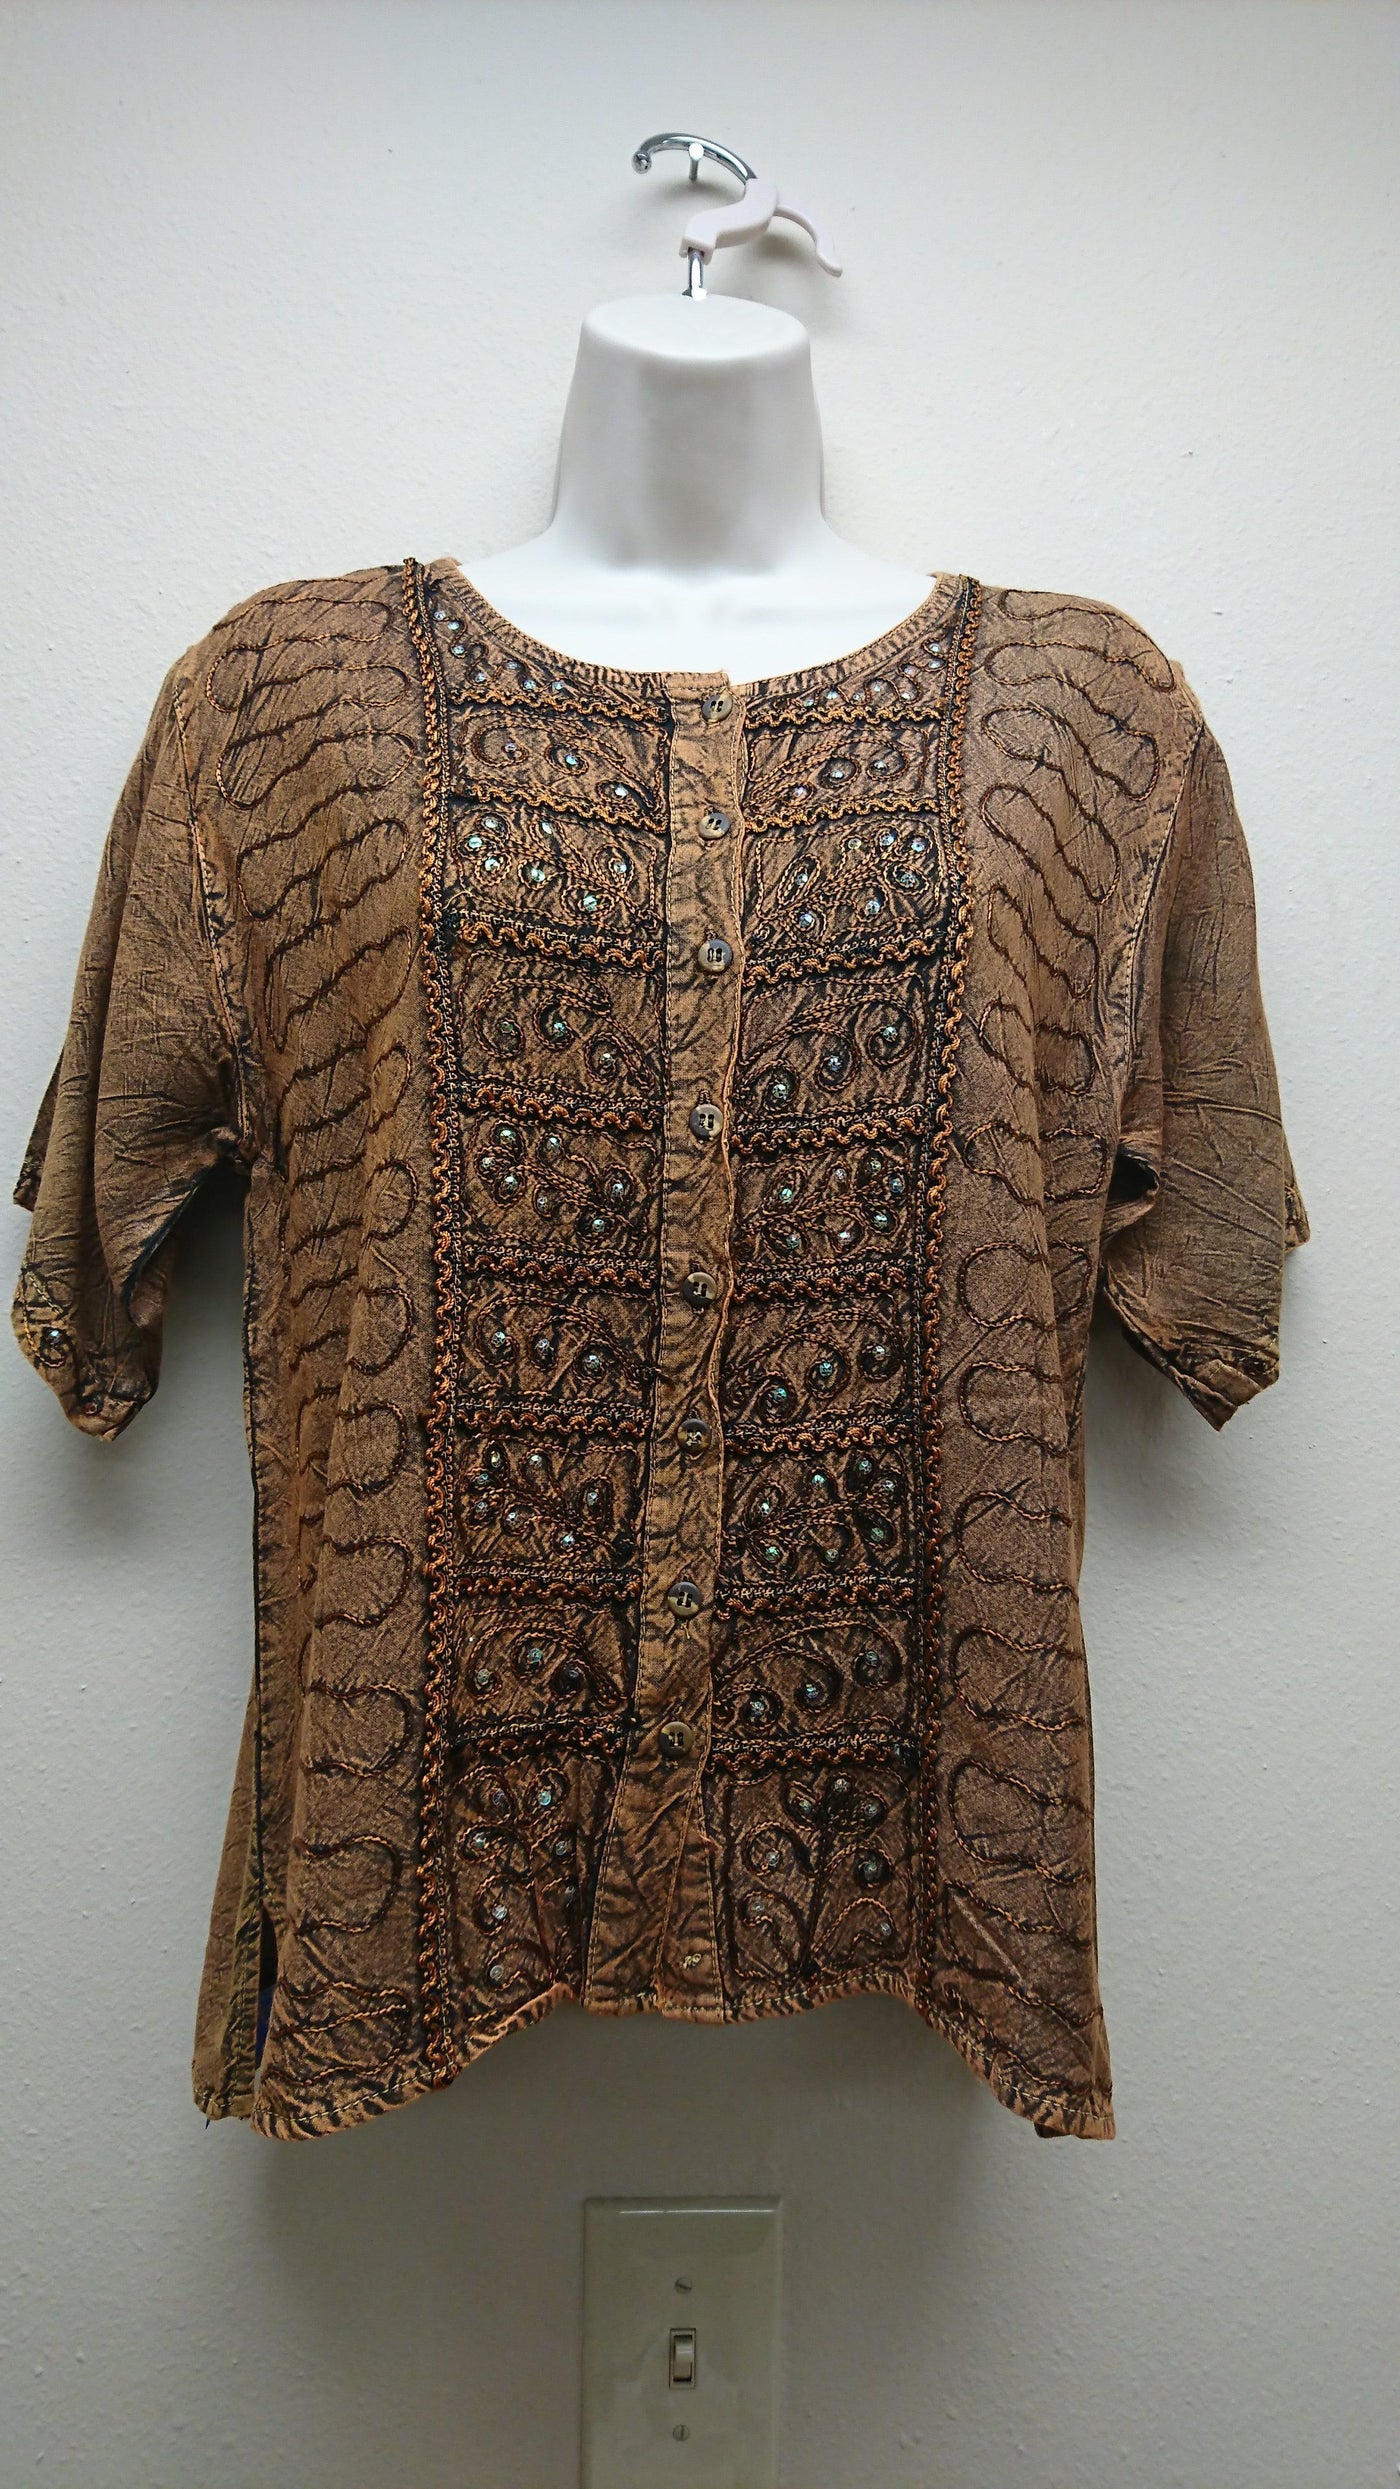 Kurti Blouse Top in Light brown - Indian Clothing in Denver, CO, Aurora, CO, Boulder, CO, Fort Collins, CO, Colorado Springs, CO, Parker, CO, Highlands Ranch, CO, Cherry Creek, CO, Centennial, CO, and Longmont, CO. Nationwide shipping USA - India Fashion X